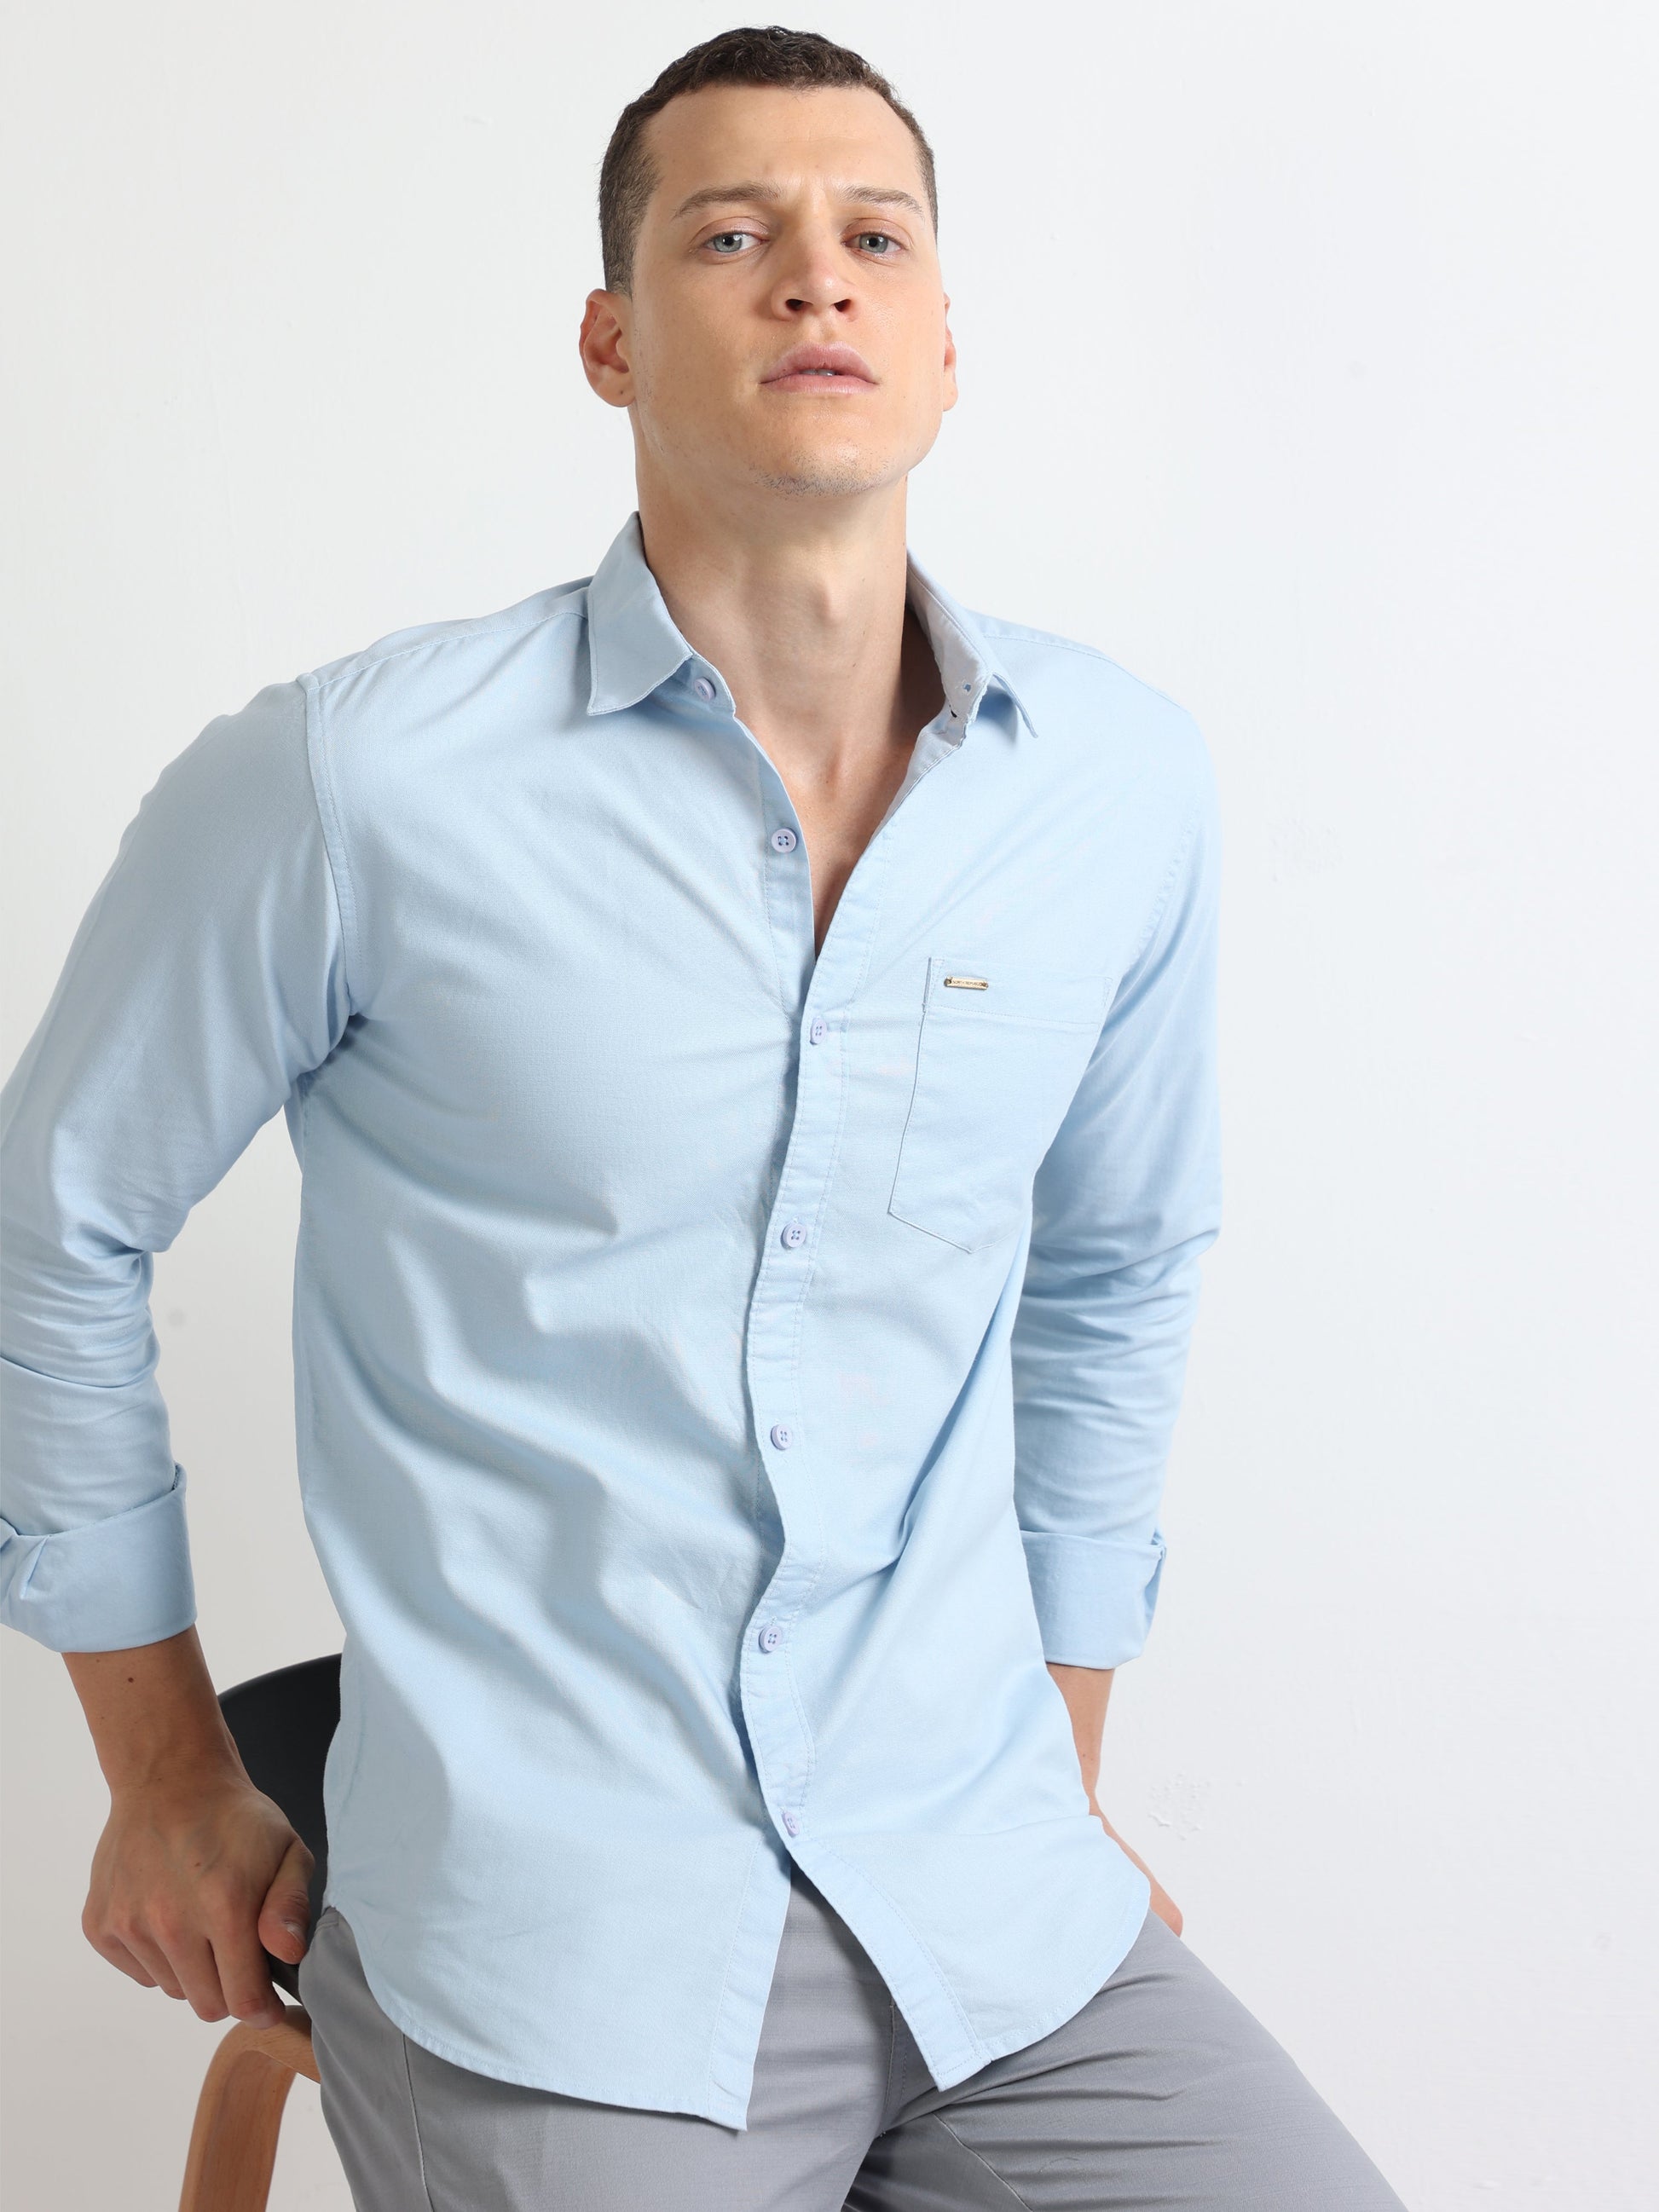 Buy Solid Full Sleeves Shirt For Work Wear Online.